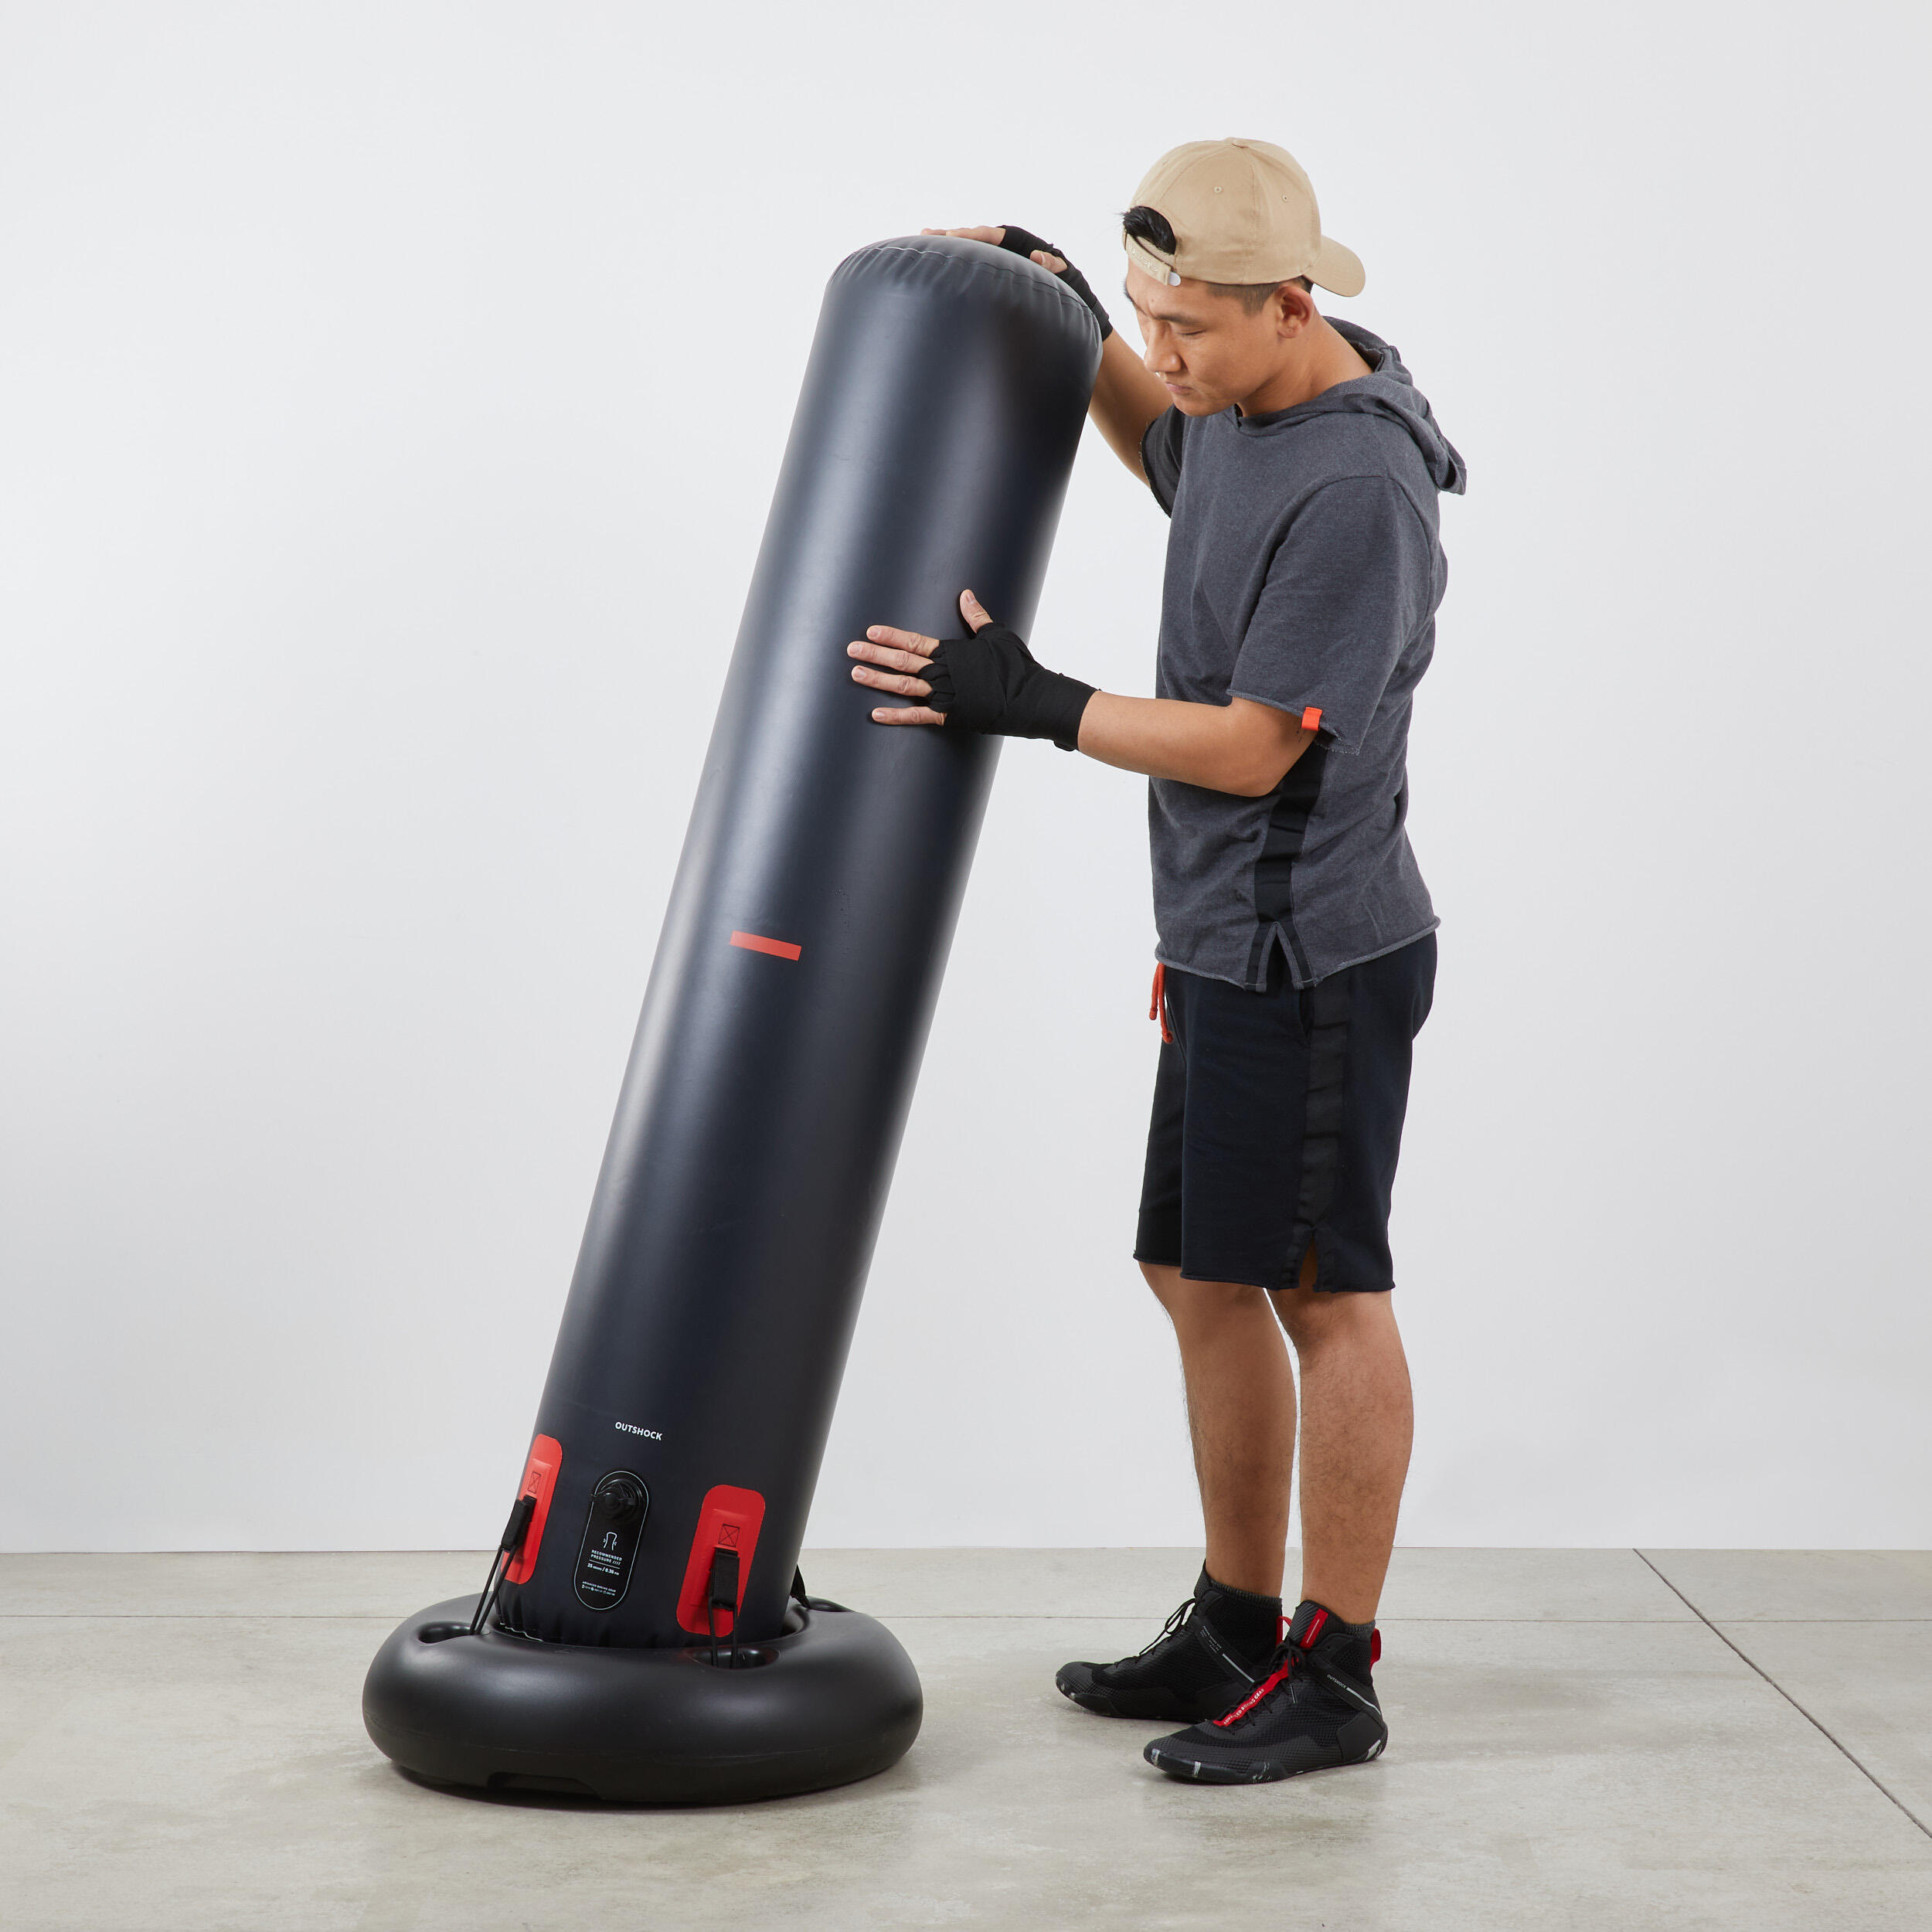 The Retro Heritage Heavy Leather Punching Bag By MVP